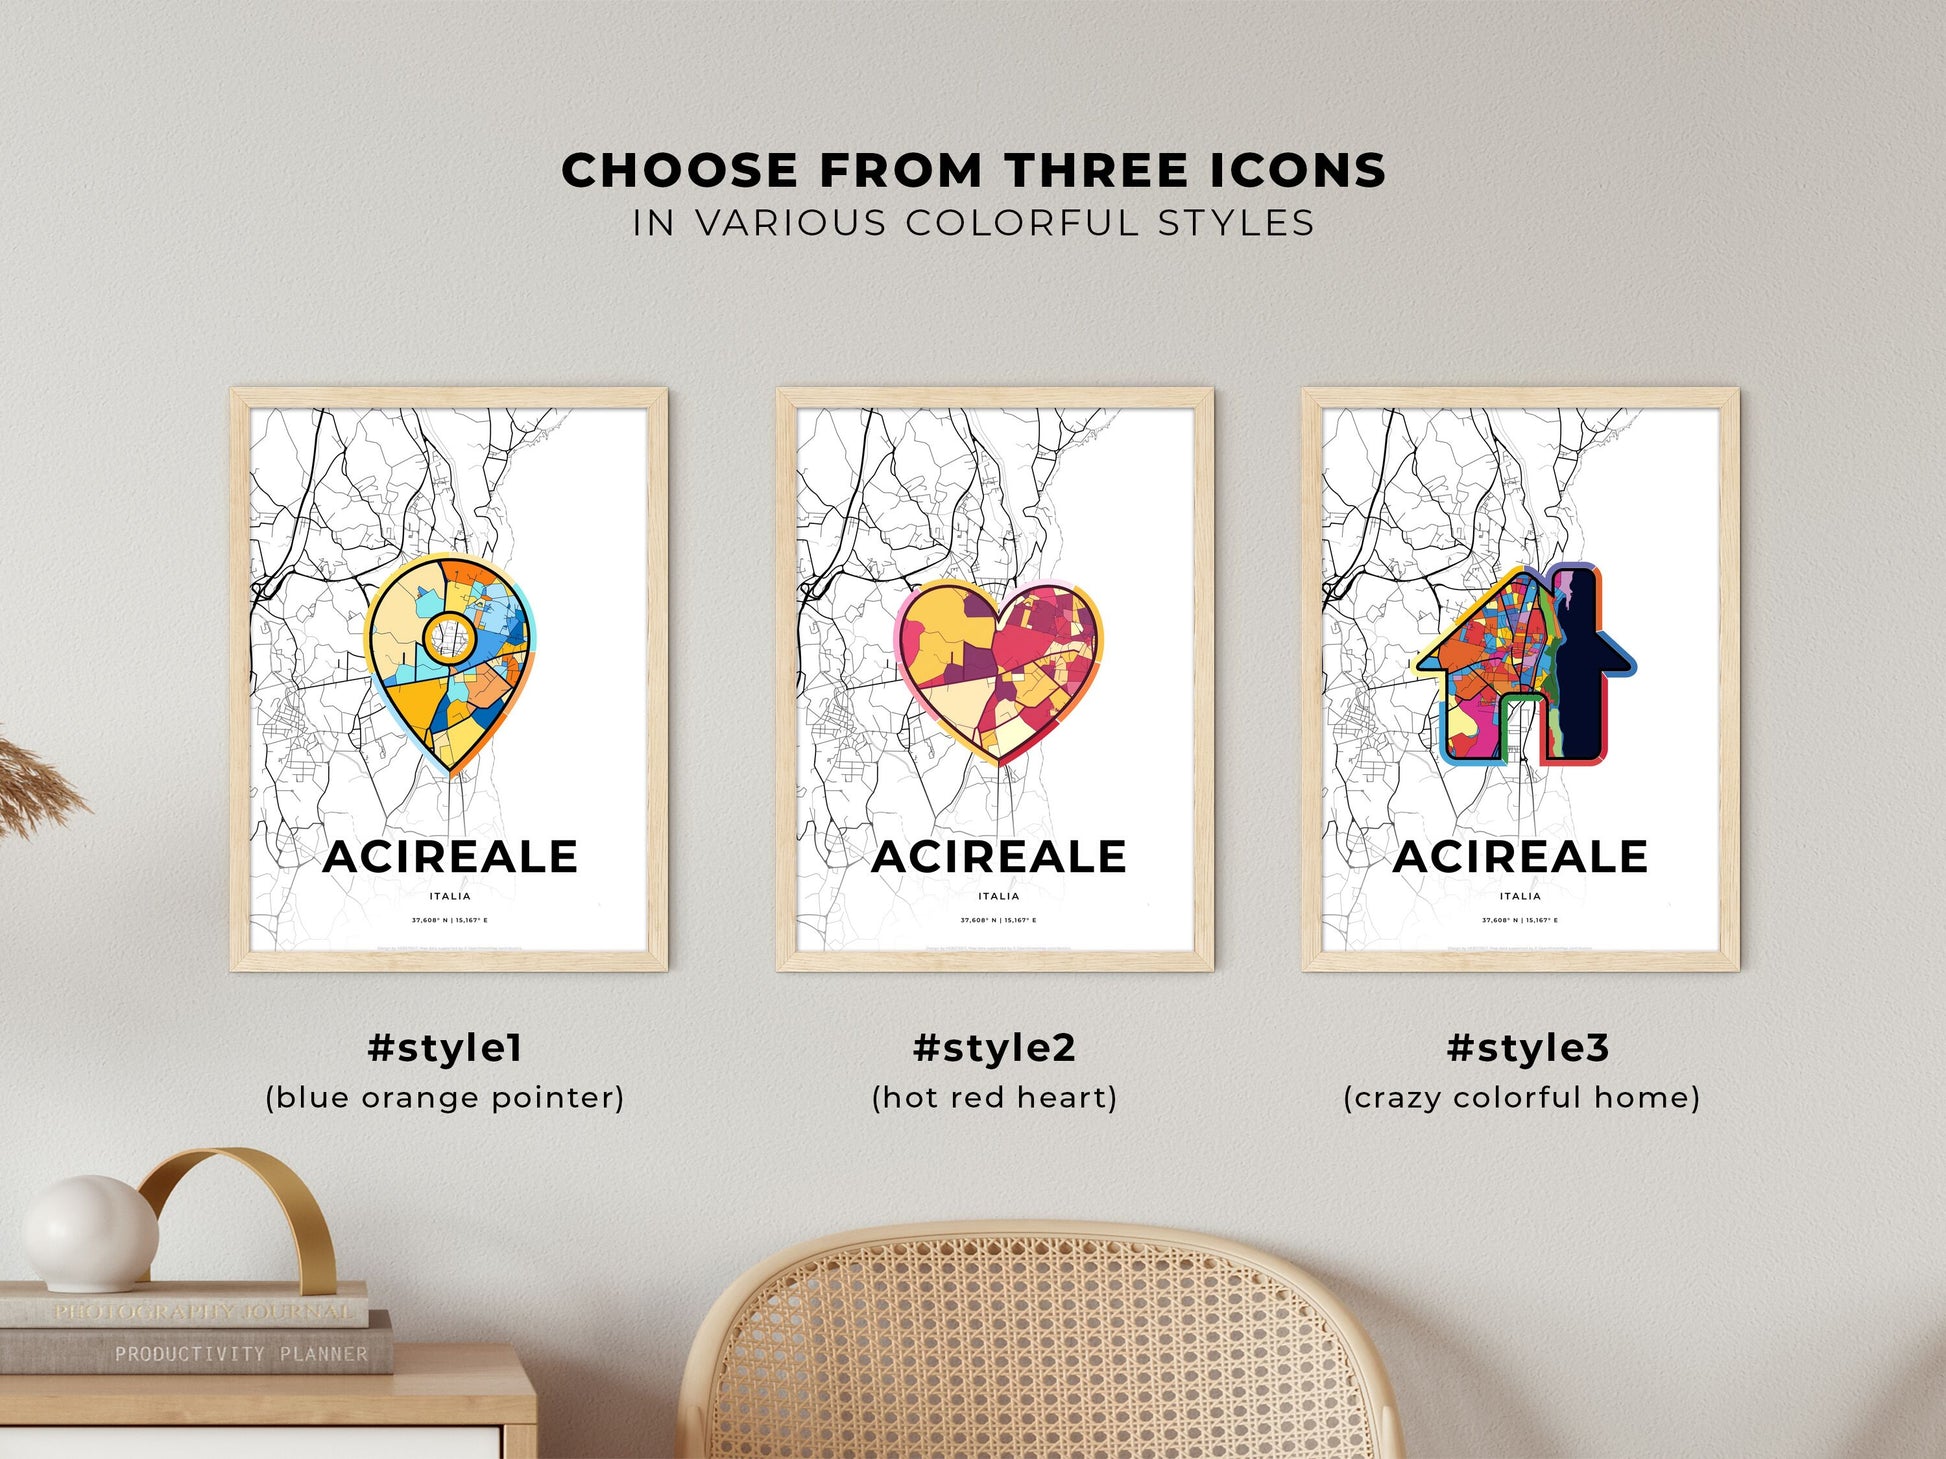 ACIREALE ITALY minimal art map with a colorful icon. Where it all began, Couple map gift.